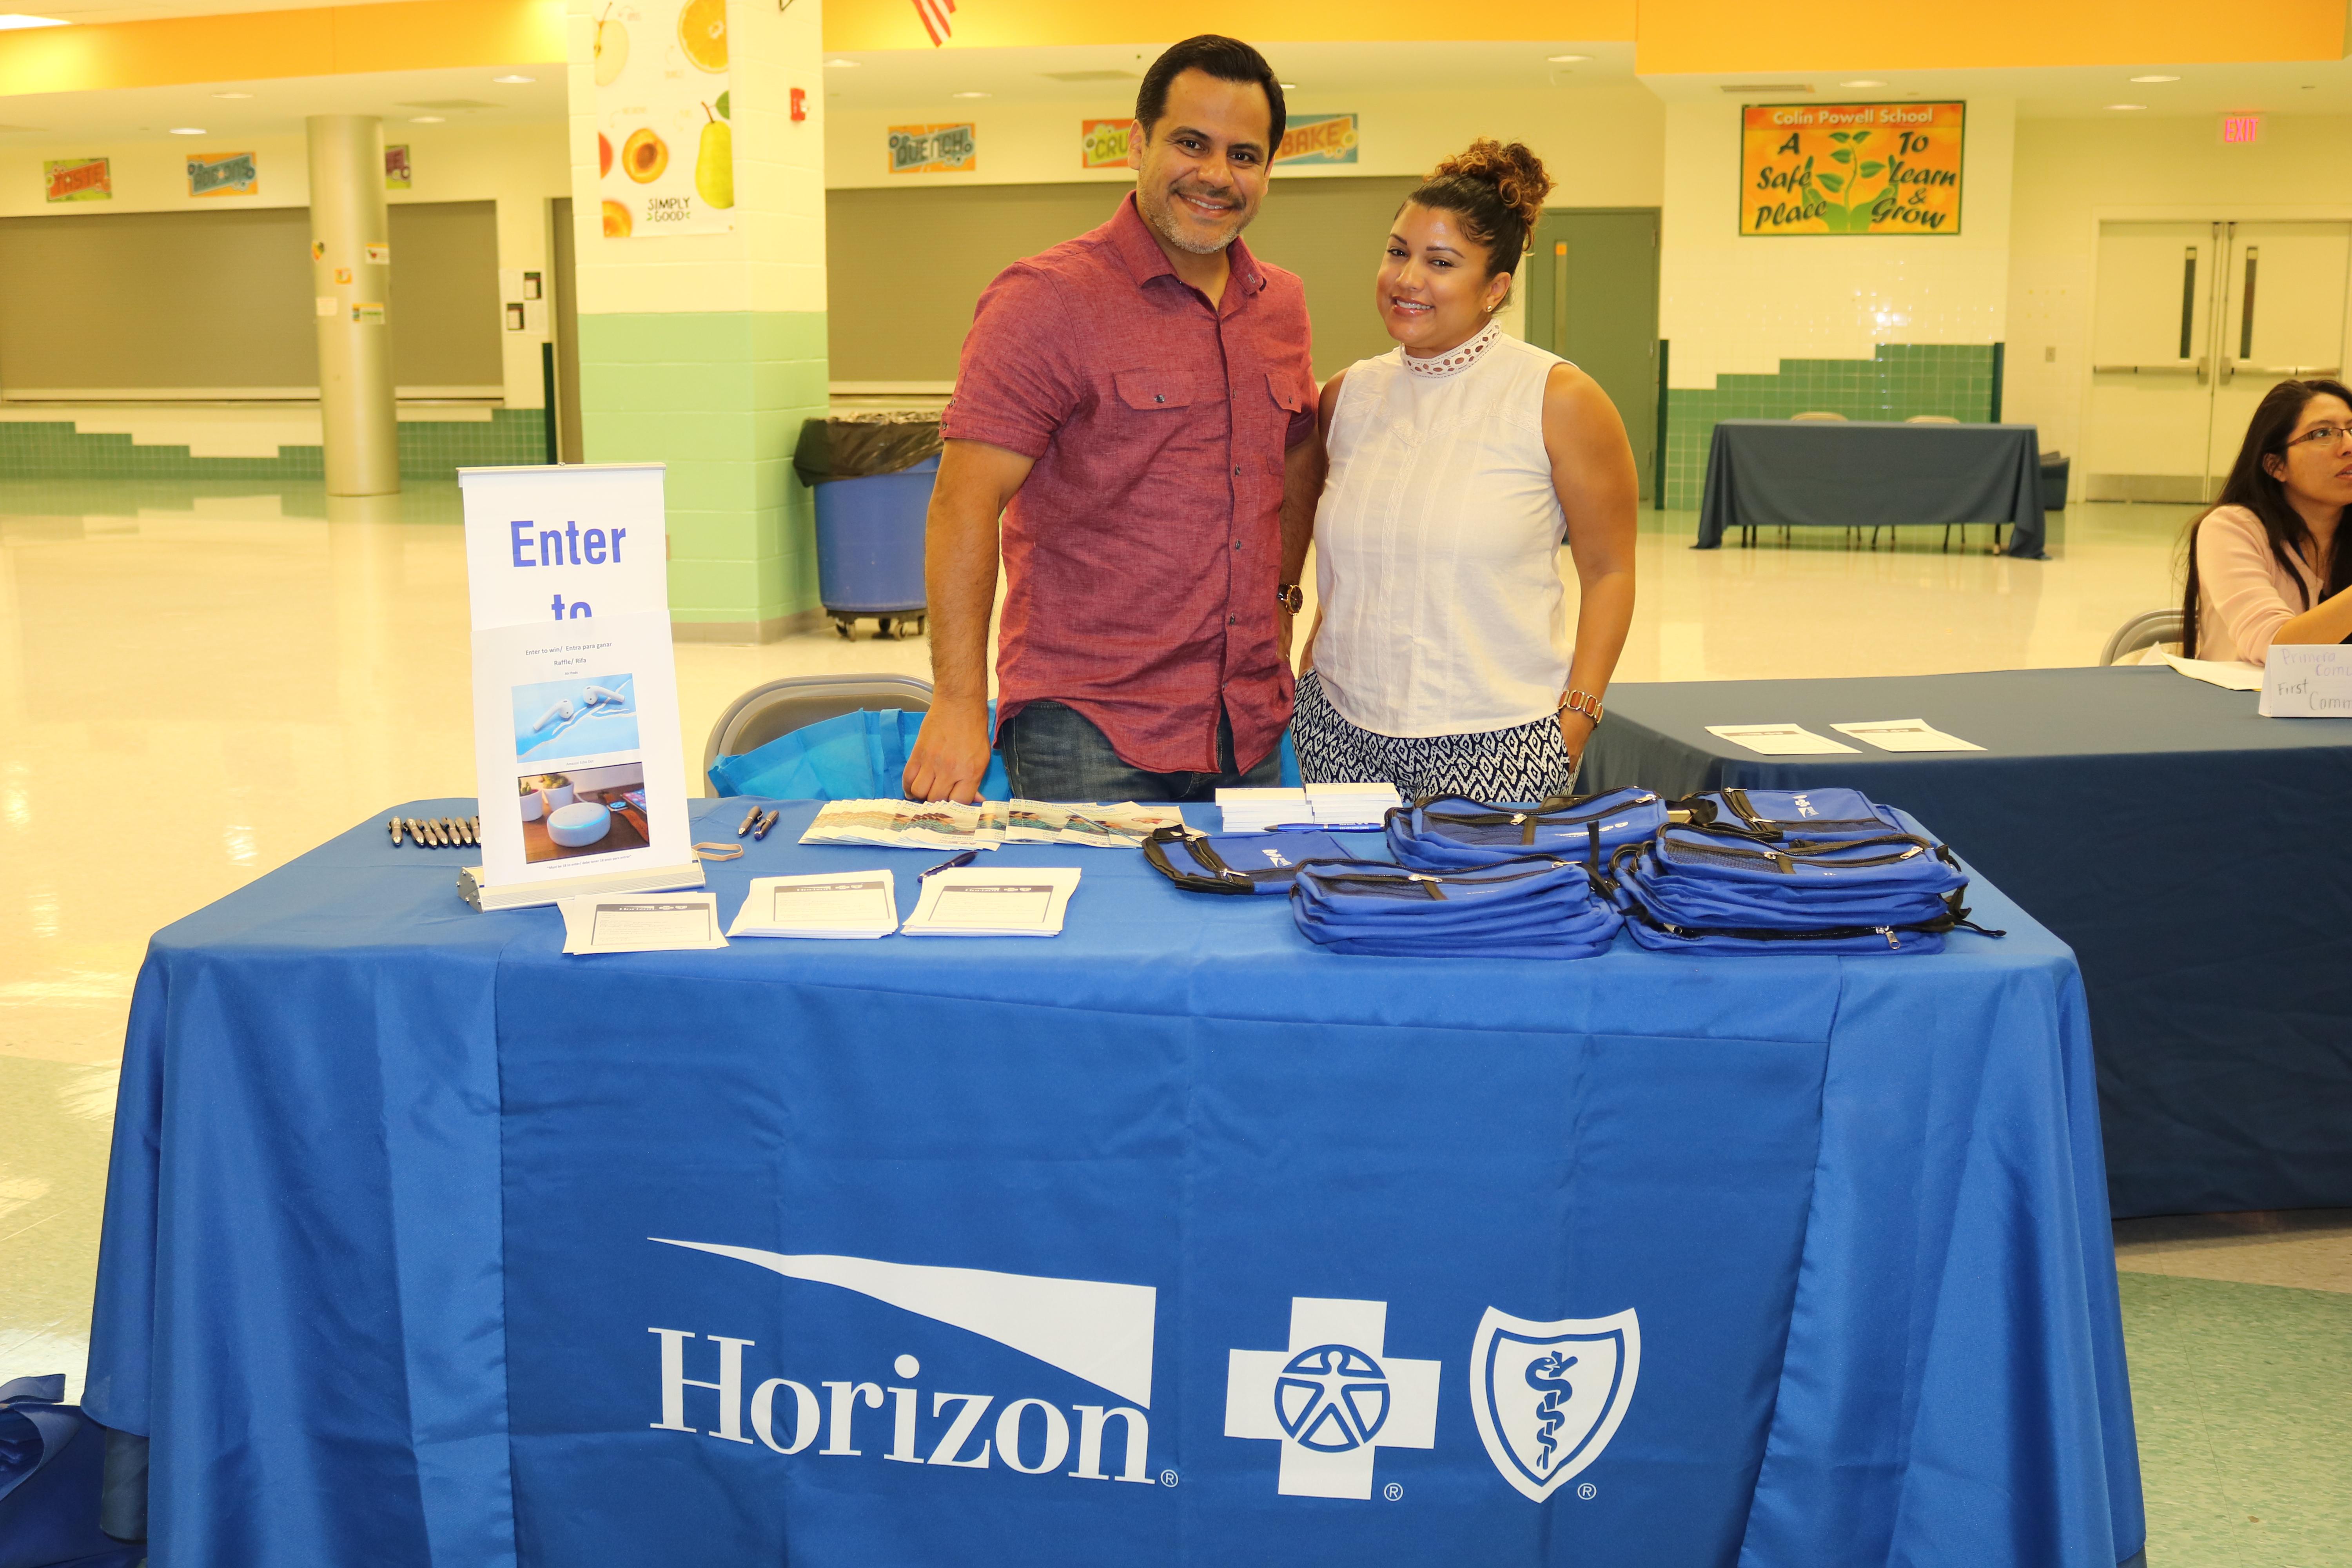 Horizon Representatives at the table with information and gifts